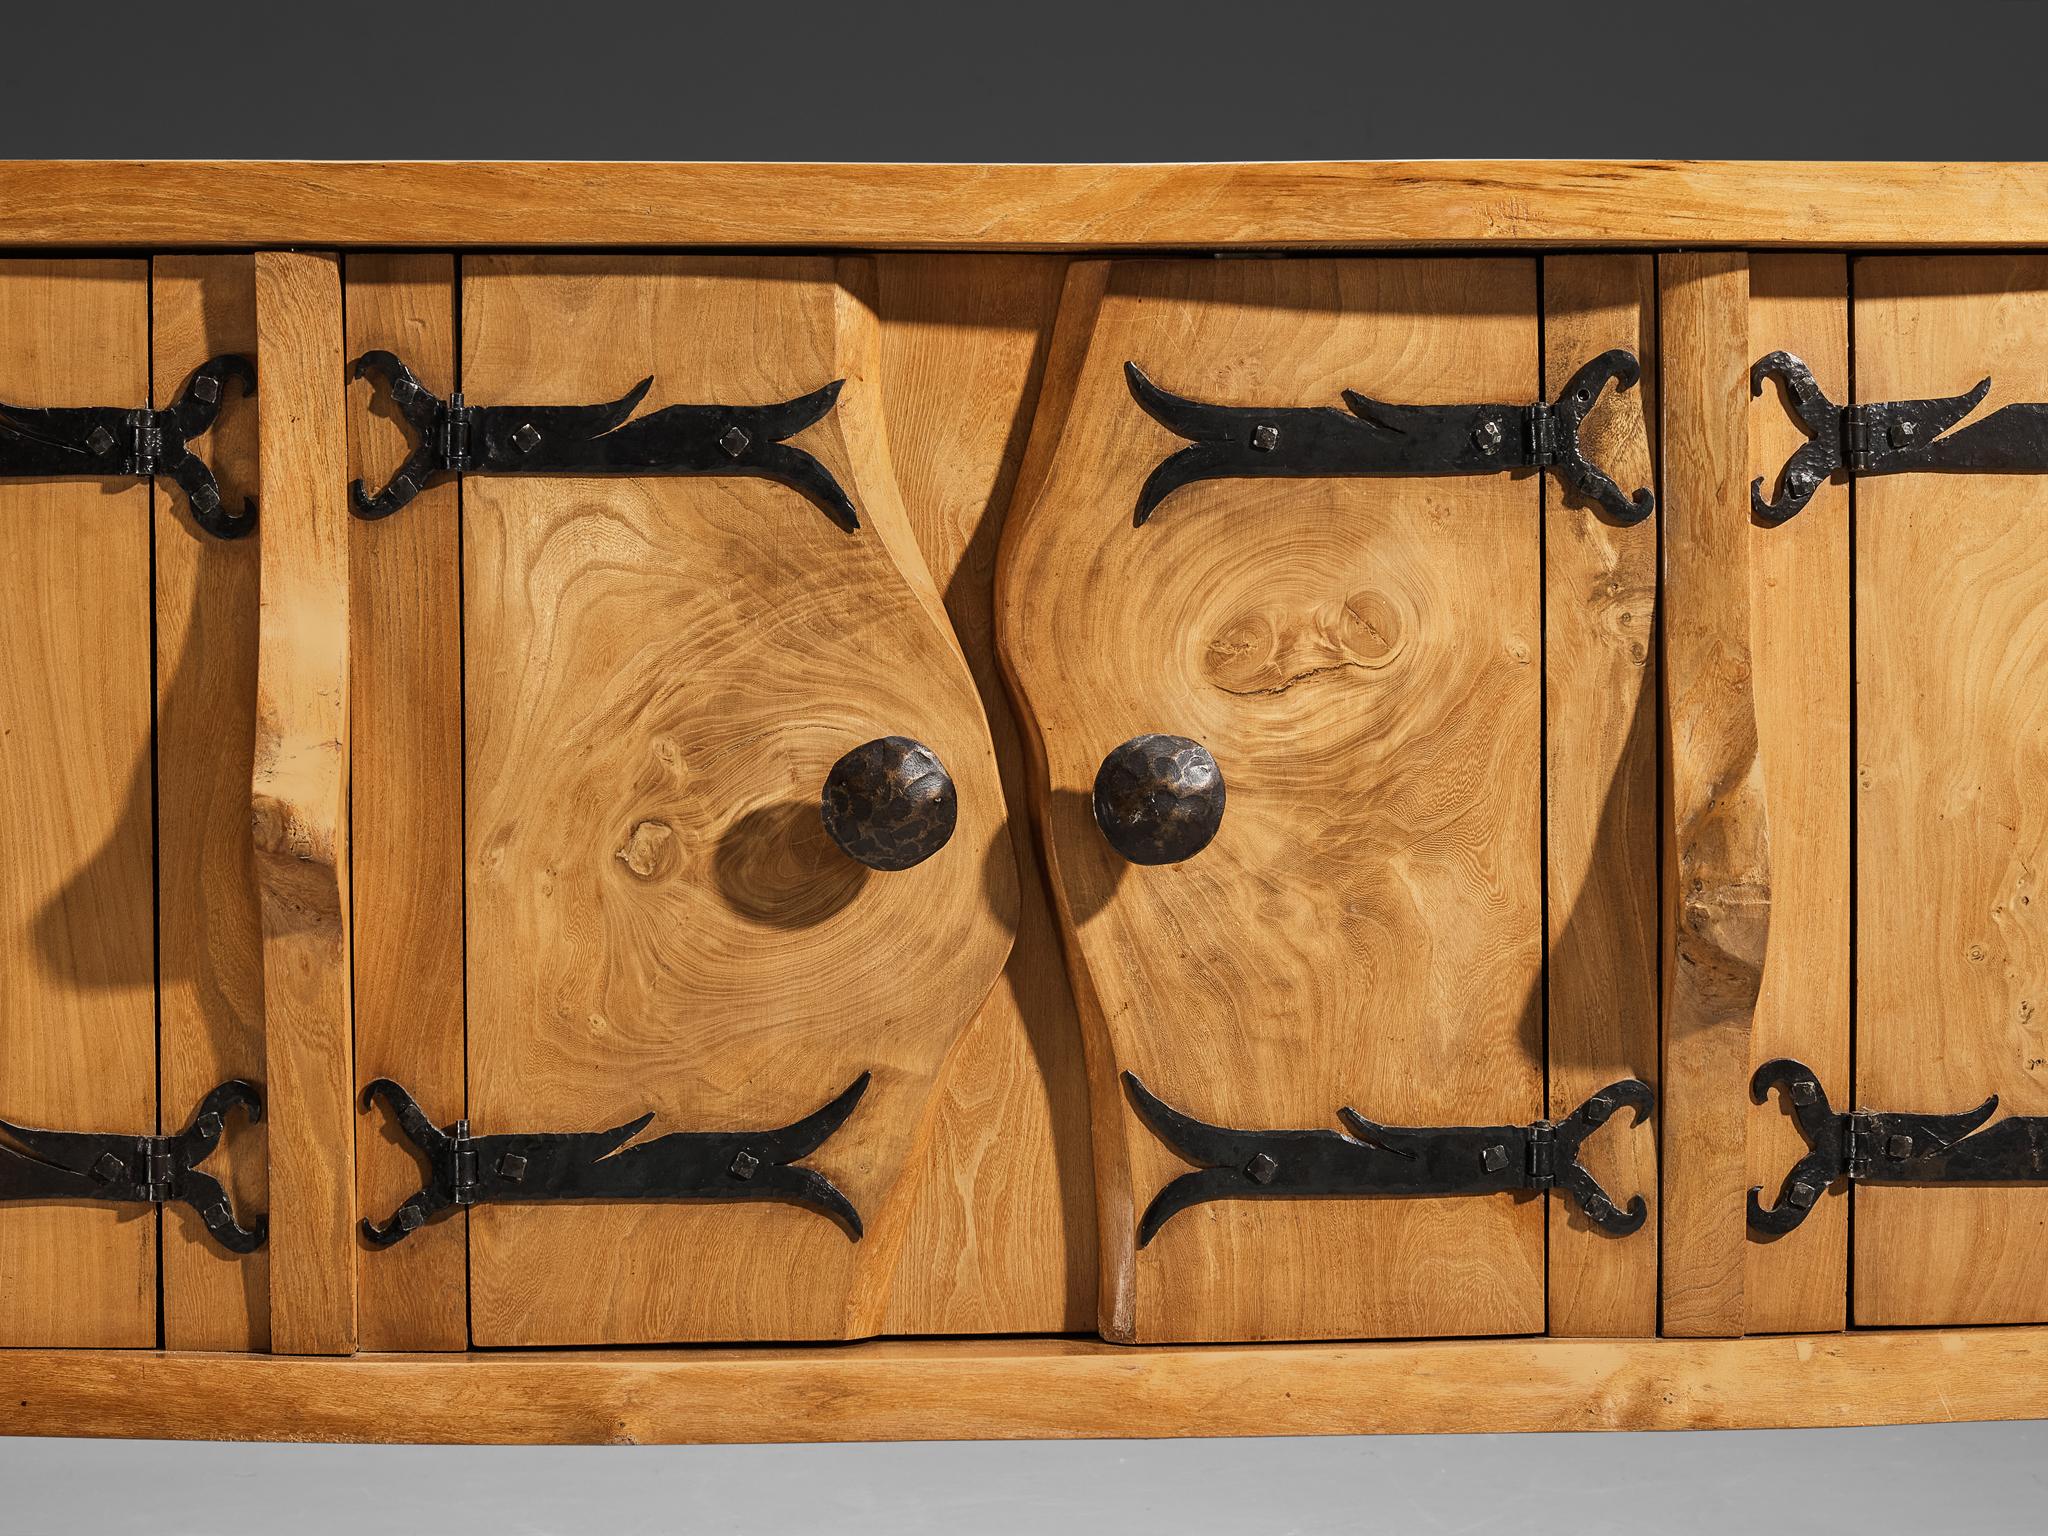 Charles Flandres Sideboard in Solid Elm and Wrought Iron